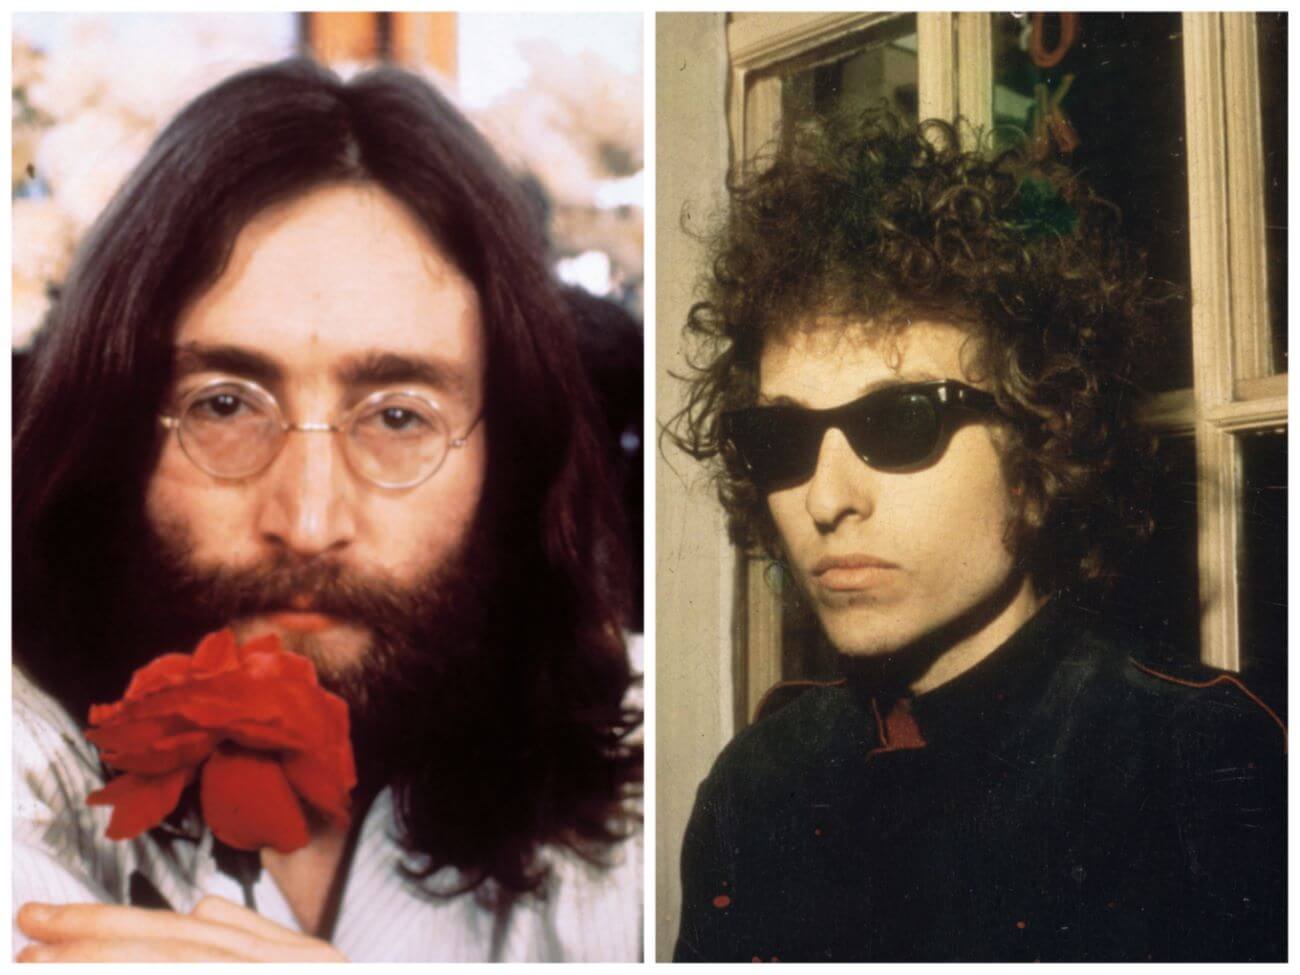 John Lennon holds a red flower up to hisi face. Bob Dylan wears sunglasses and leans against a window.